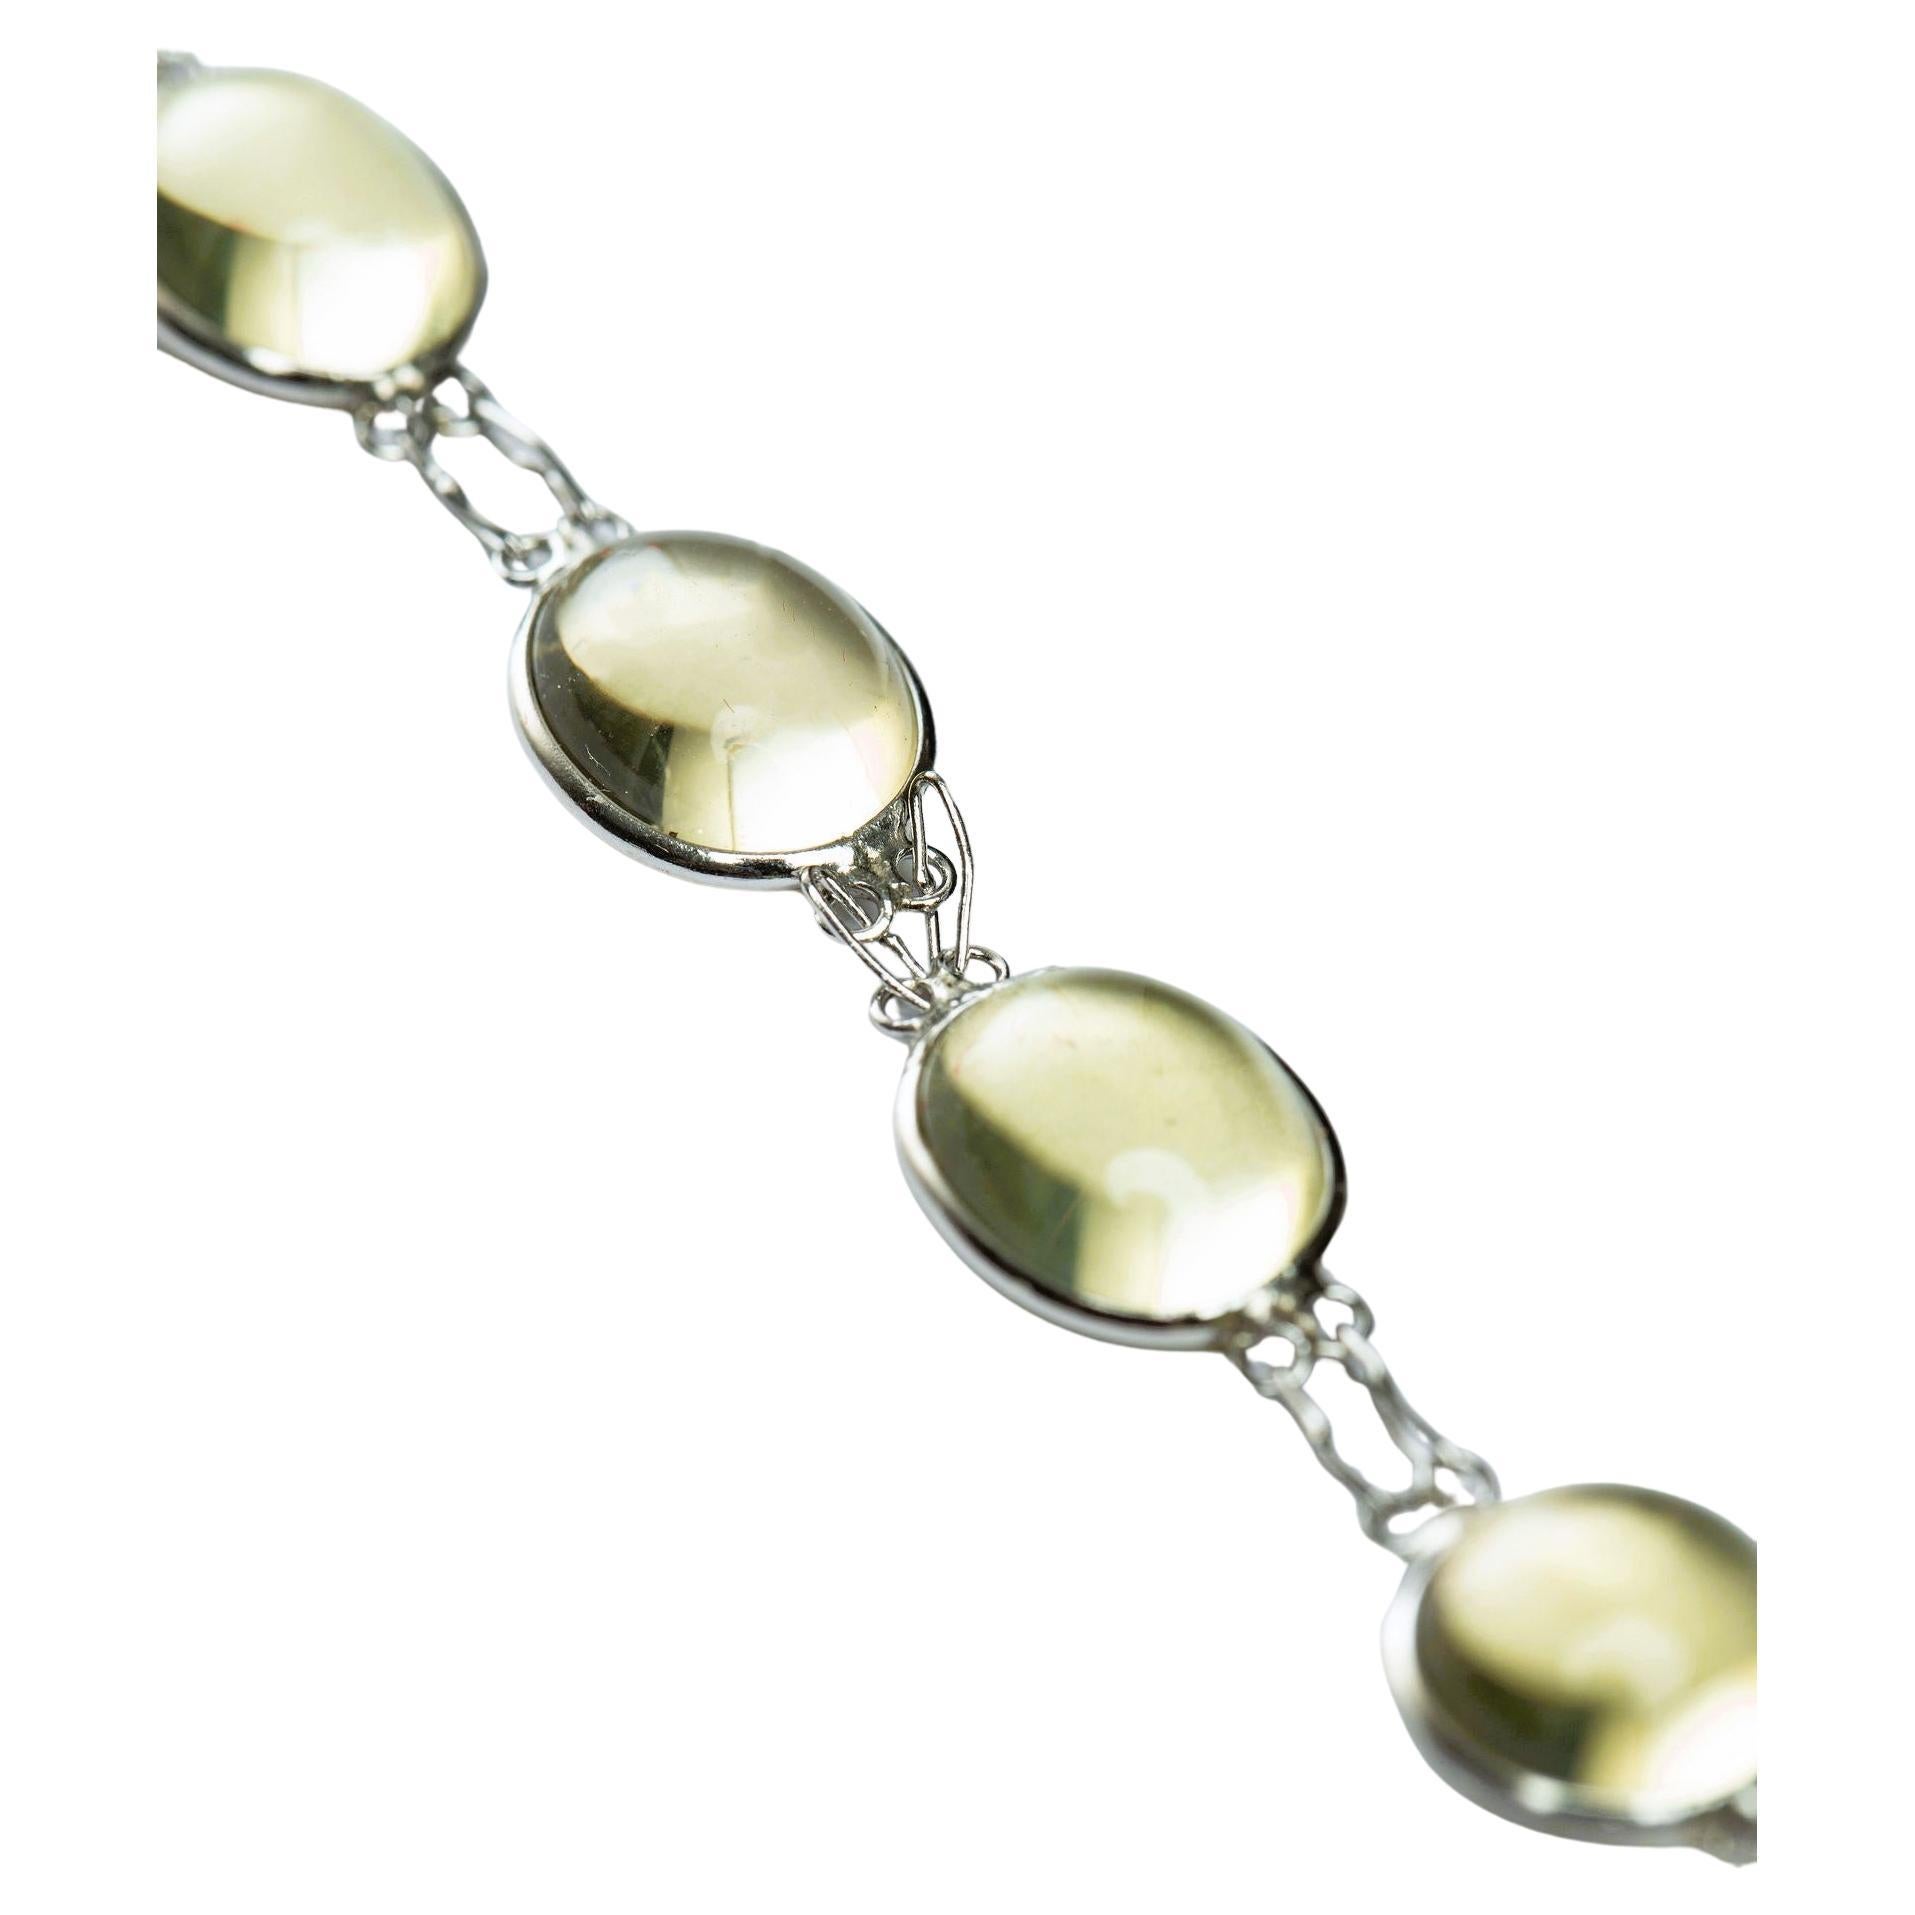 Contemporary 13ctw Cabochon Natural Untreated Citrine Link Bracelet For Sale